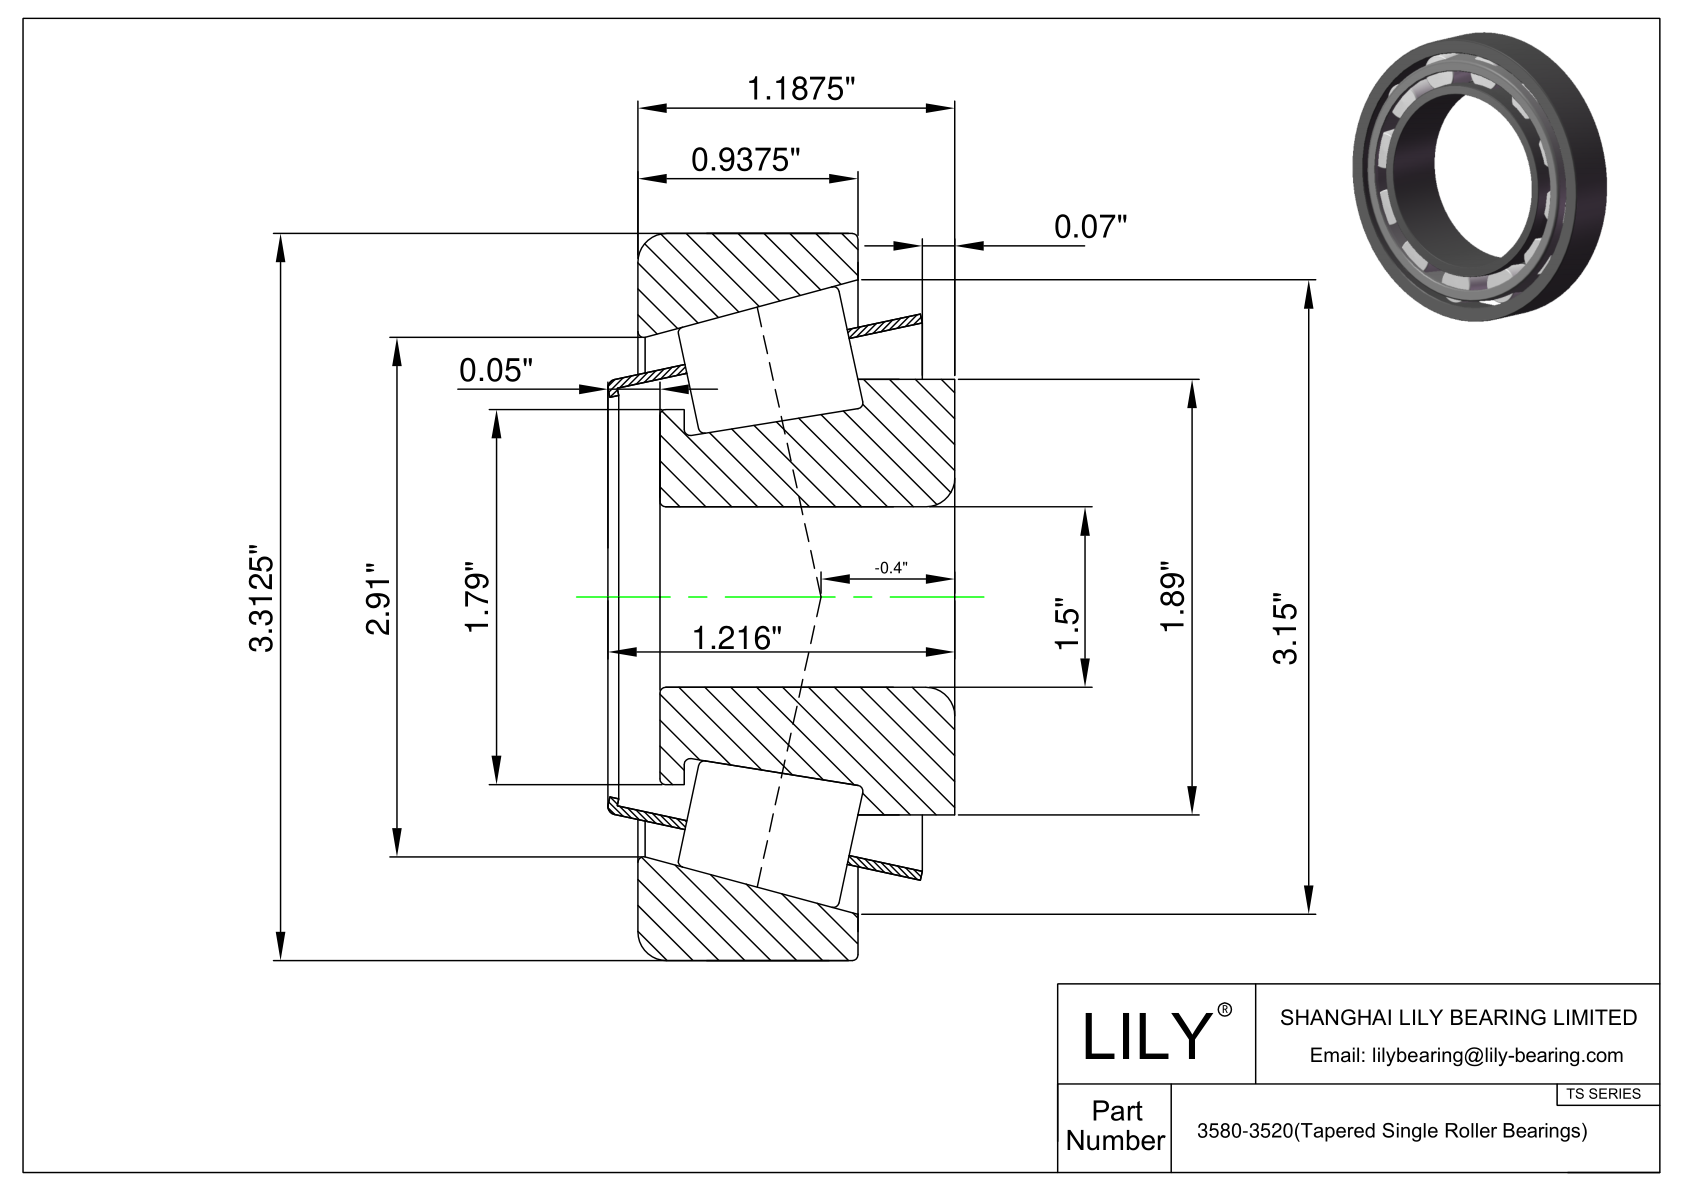 3580-3520 TS (Tapered Single Roller Bearings) (Imperial) cad drawing